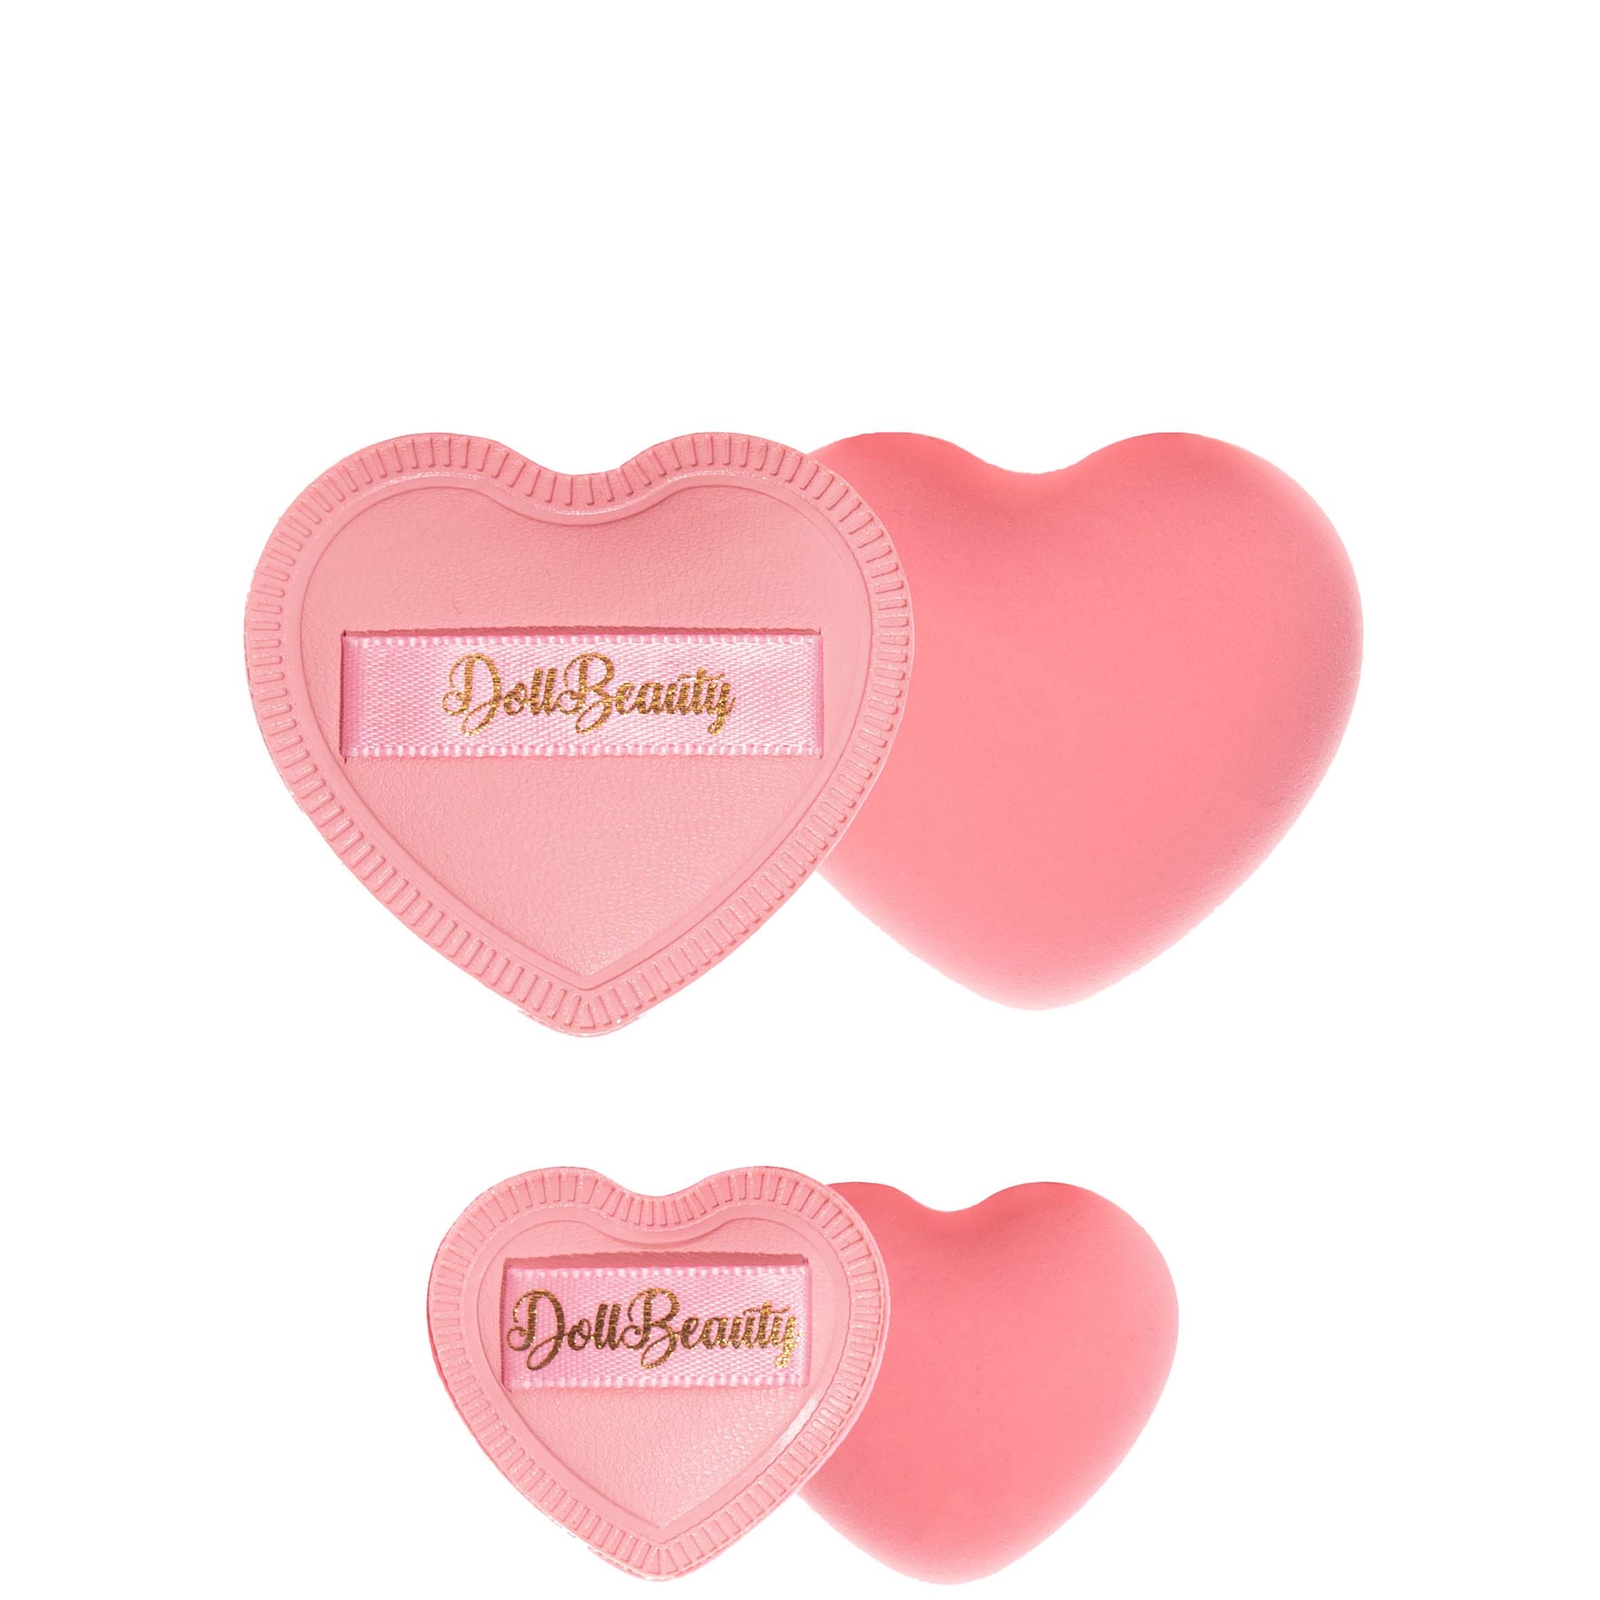 Doll Beauty When 2 Hearts Collide Powder Puff In White